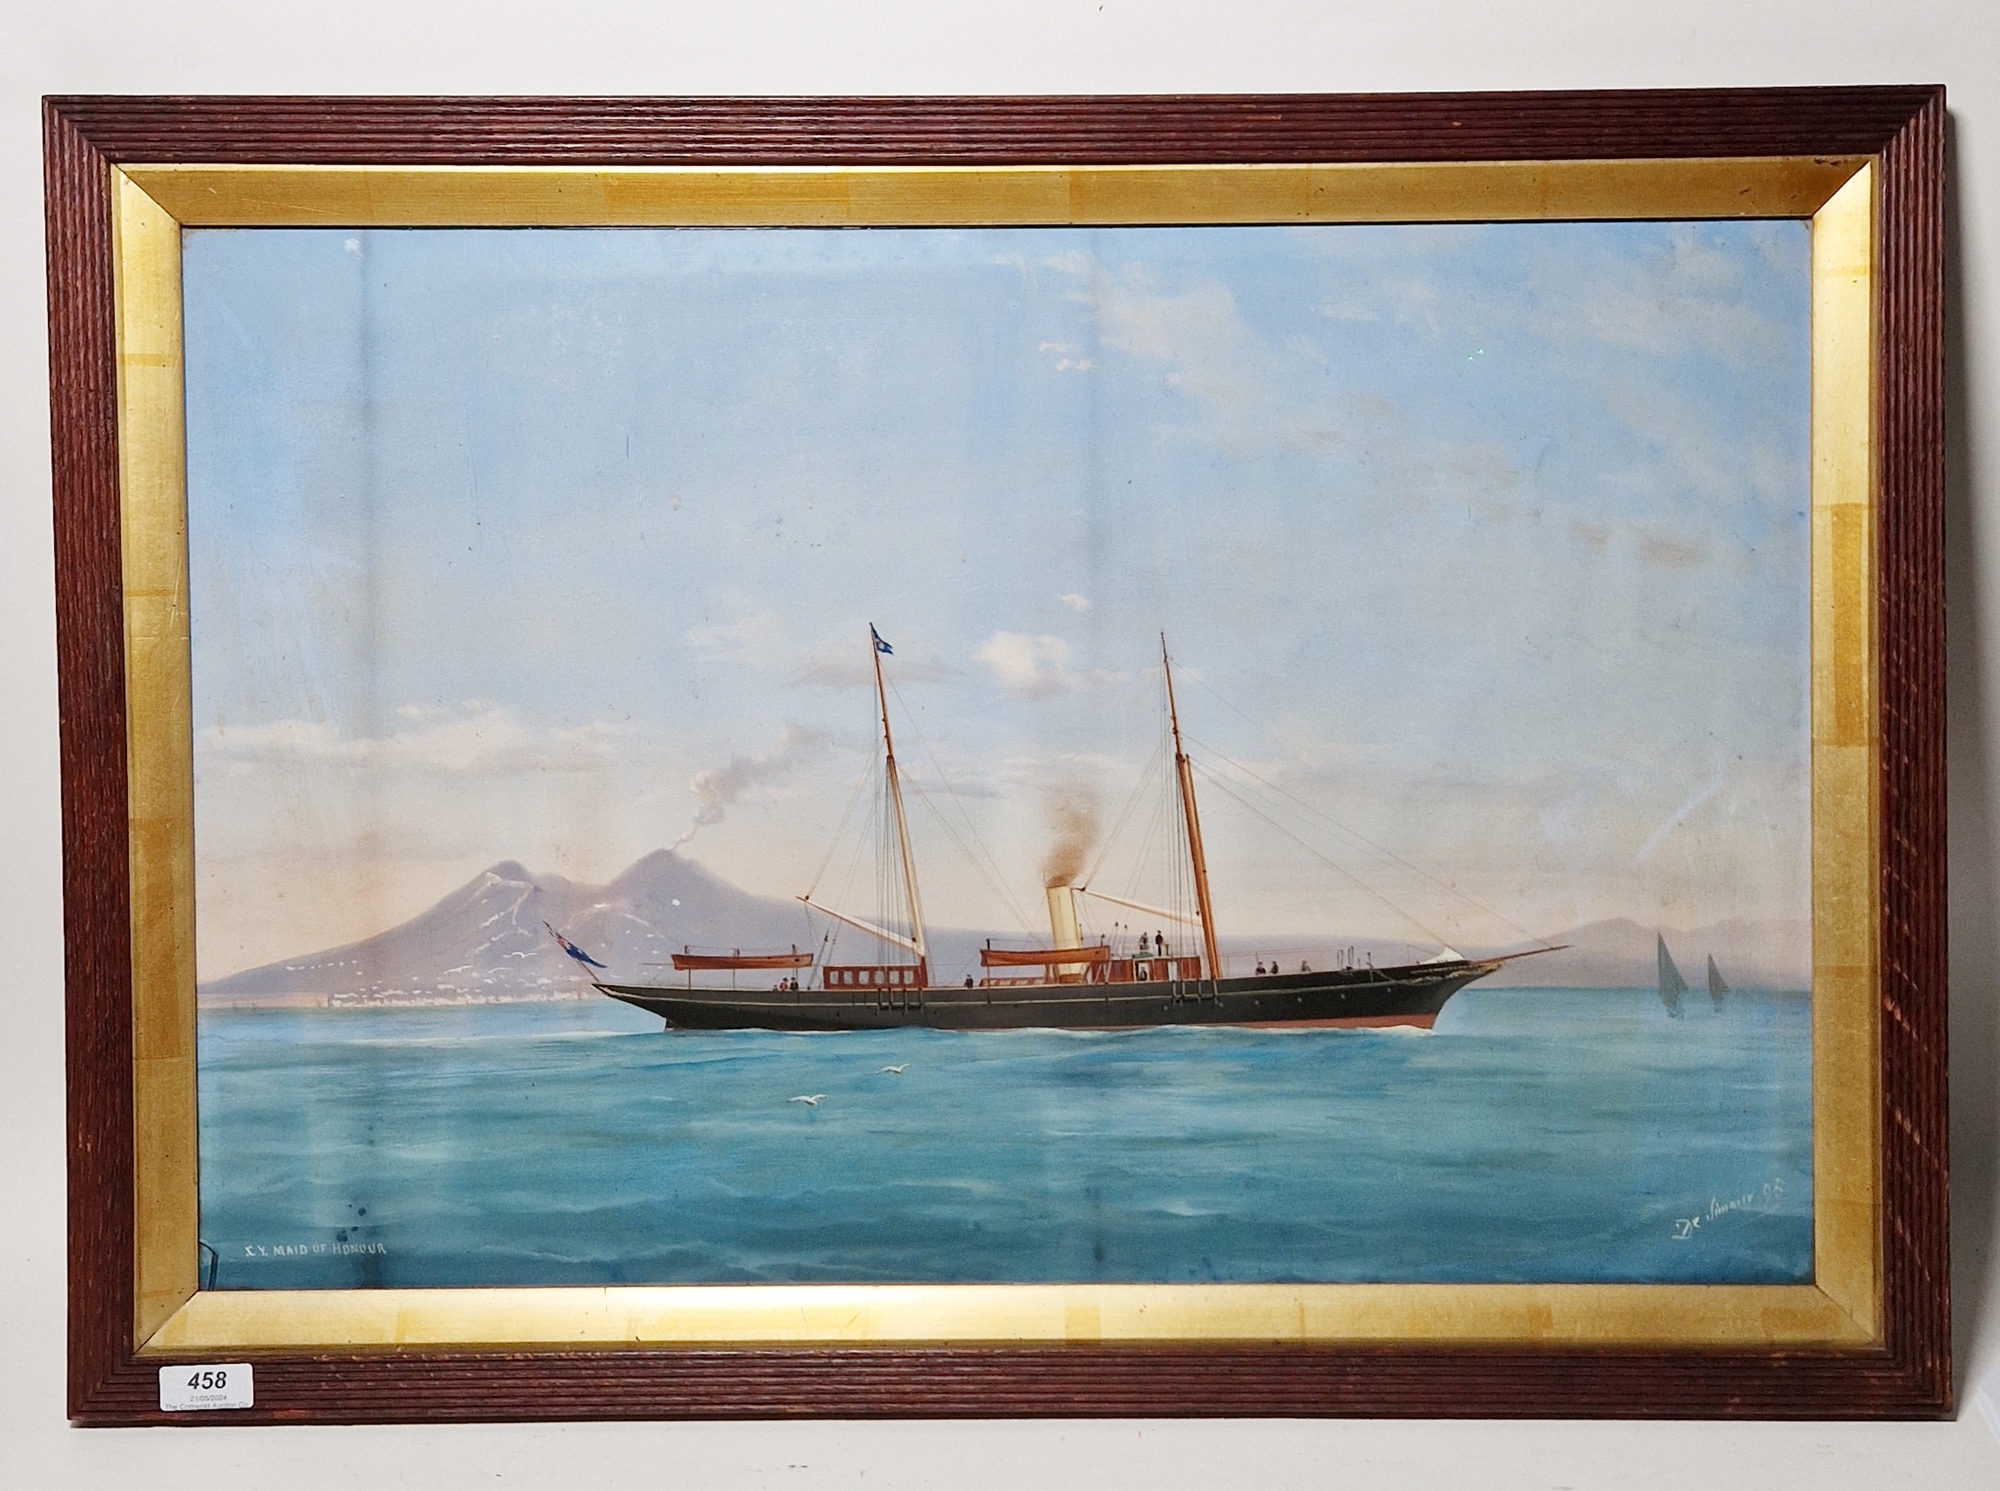 De Simone (19th/20th century) Gouache on paper The S.Y. Maid of Honour, titled and signed, 41 cm x - Image 2 of 4